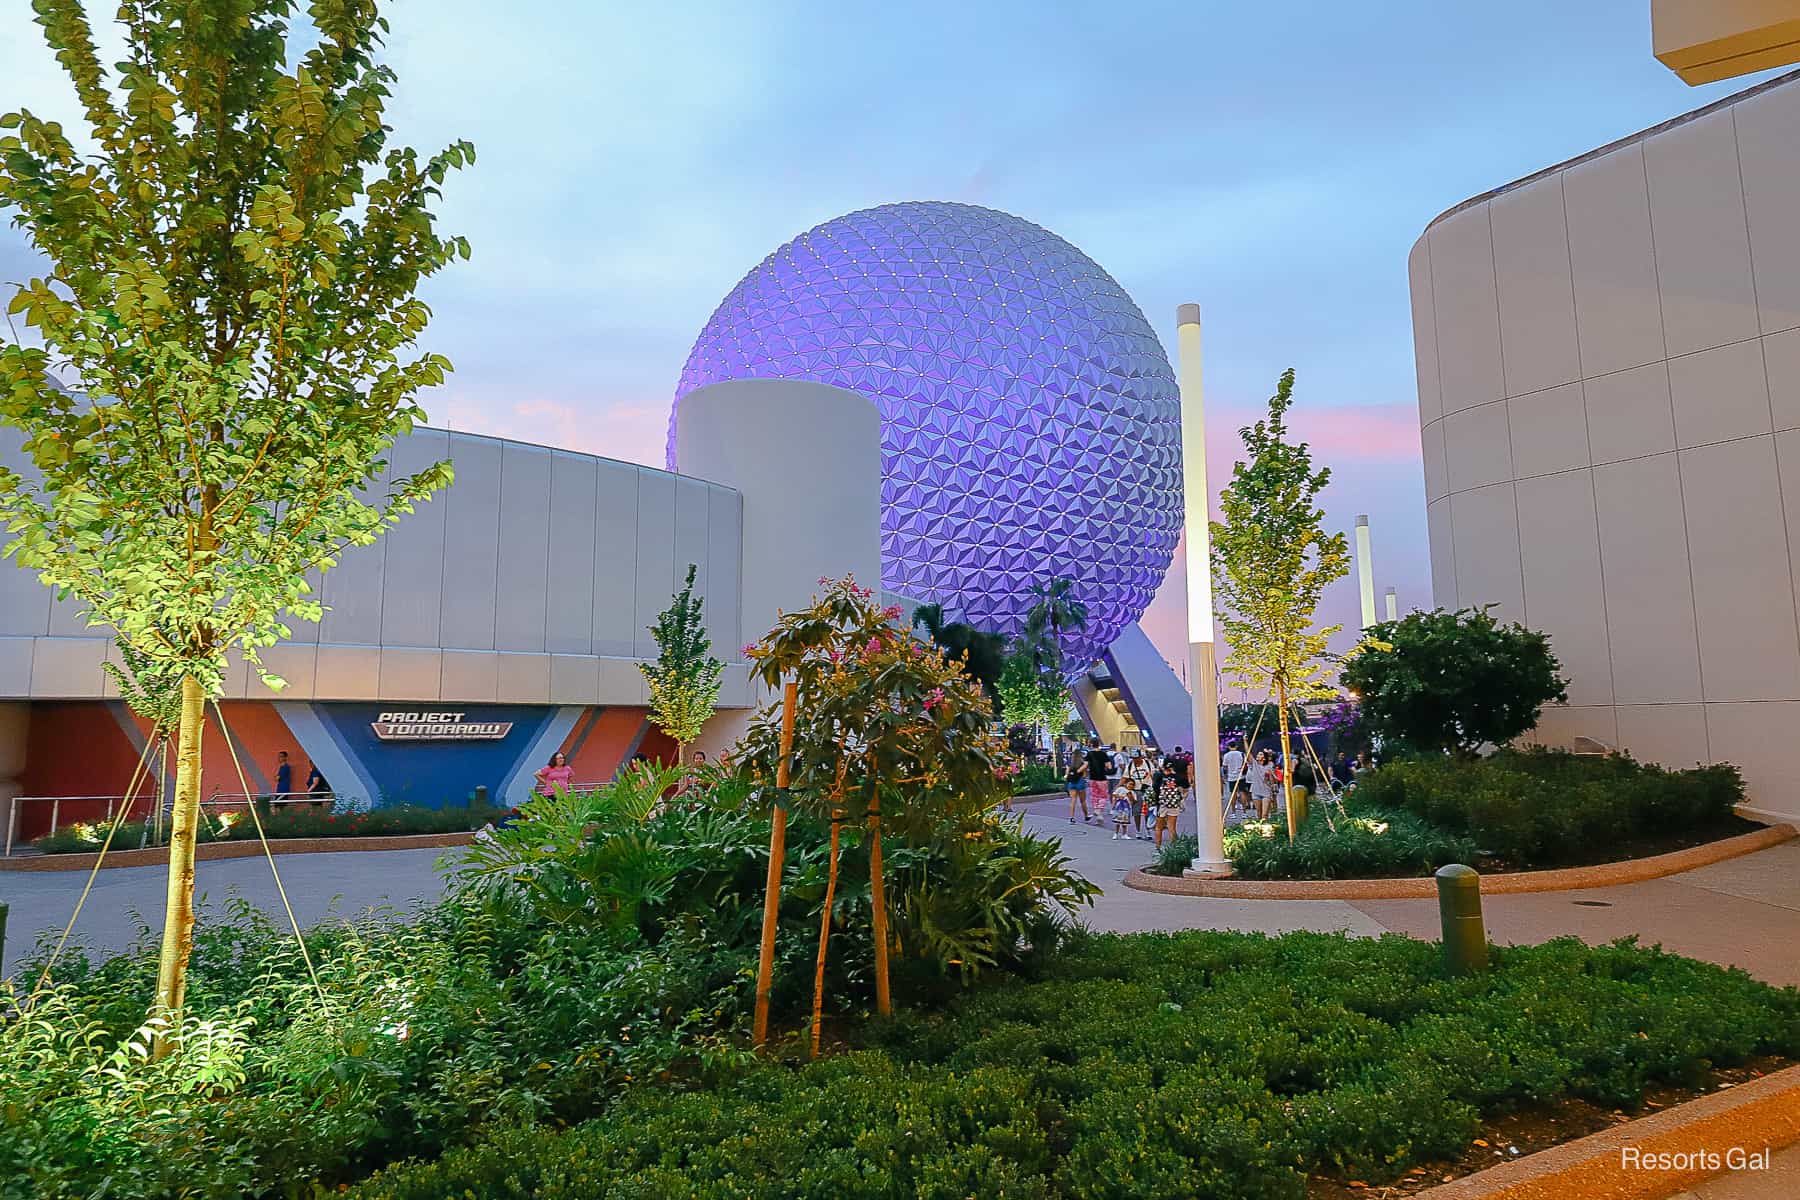 Spaceship Earth glowing in a purple color at sunset with pink accents in the sky. 